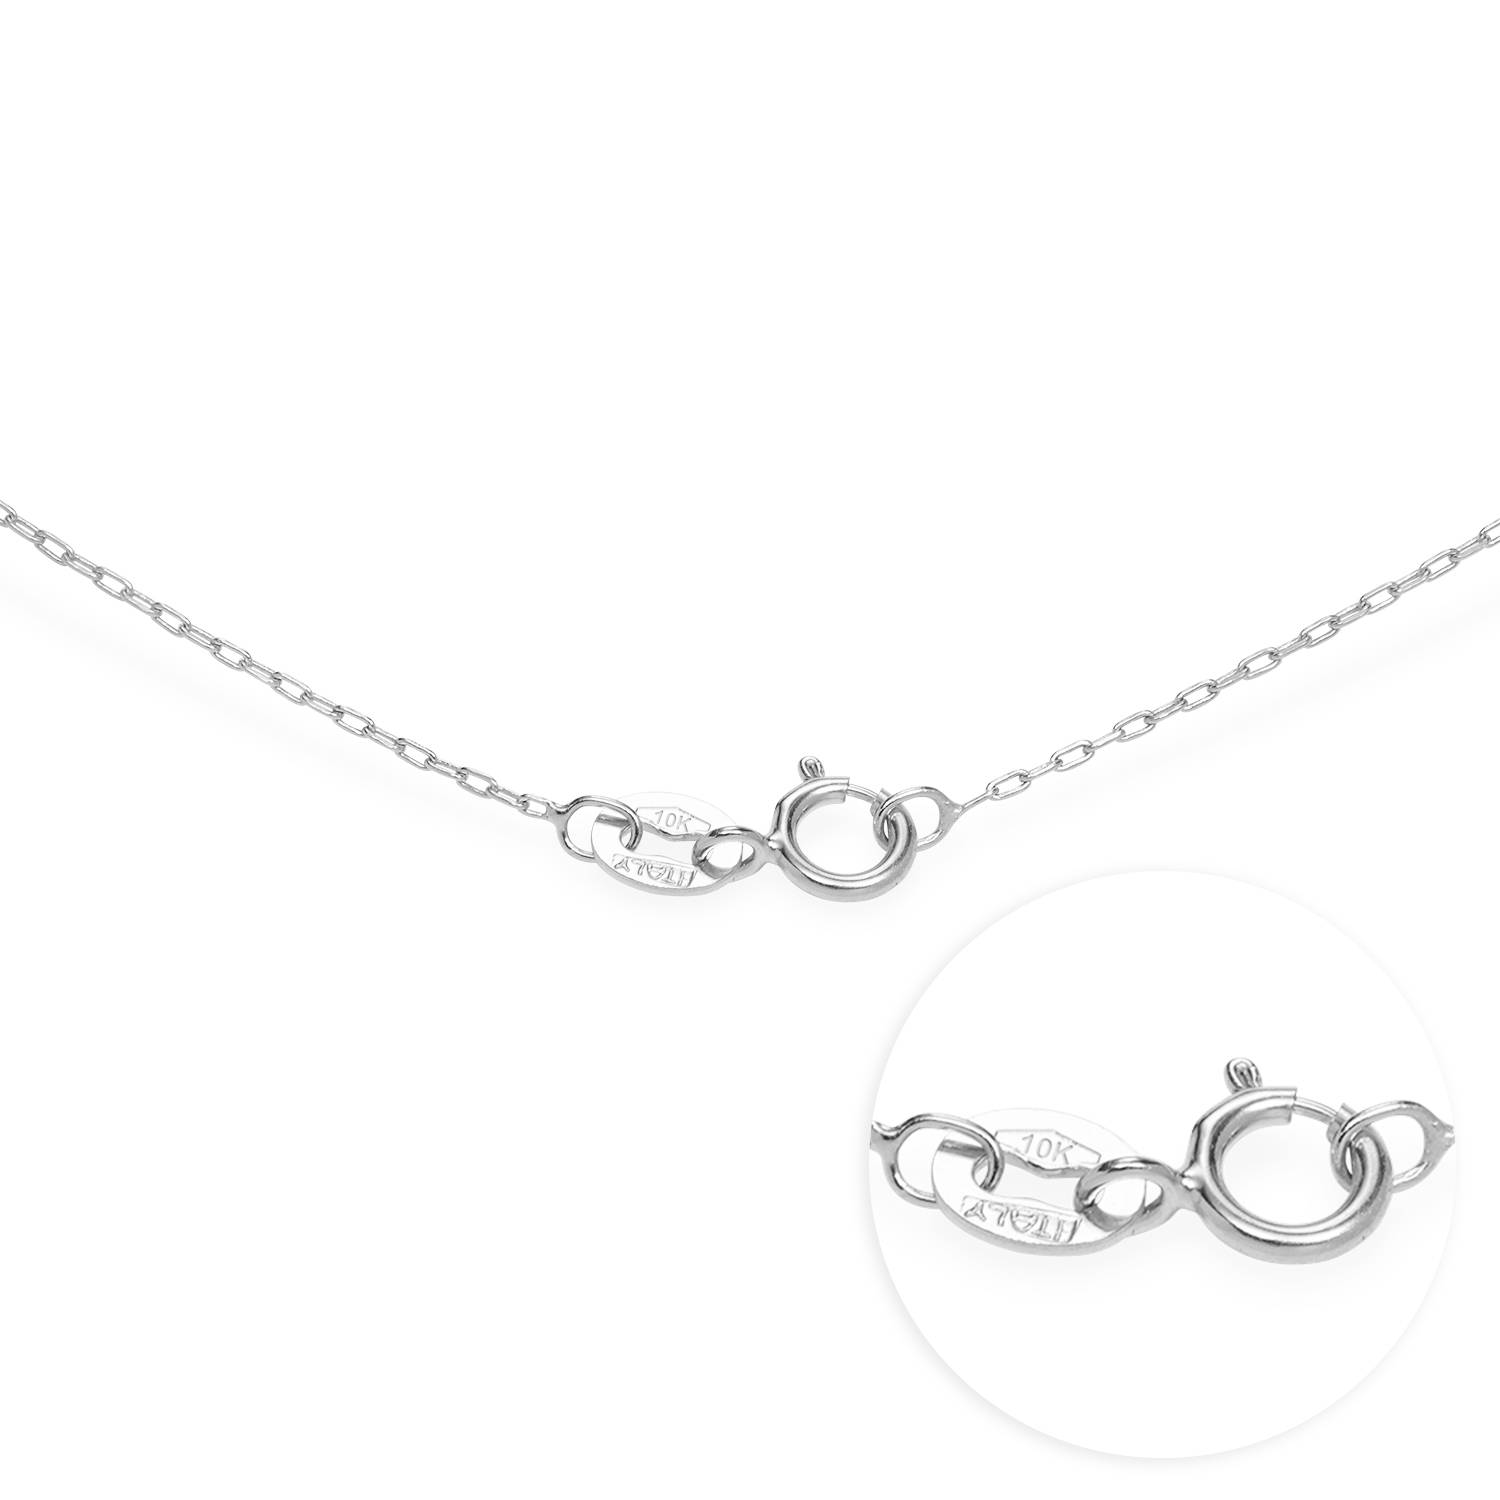 Engraved Family Necklace Drop Shaped in White Gold-1 product photo